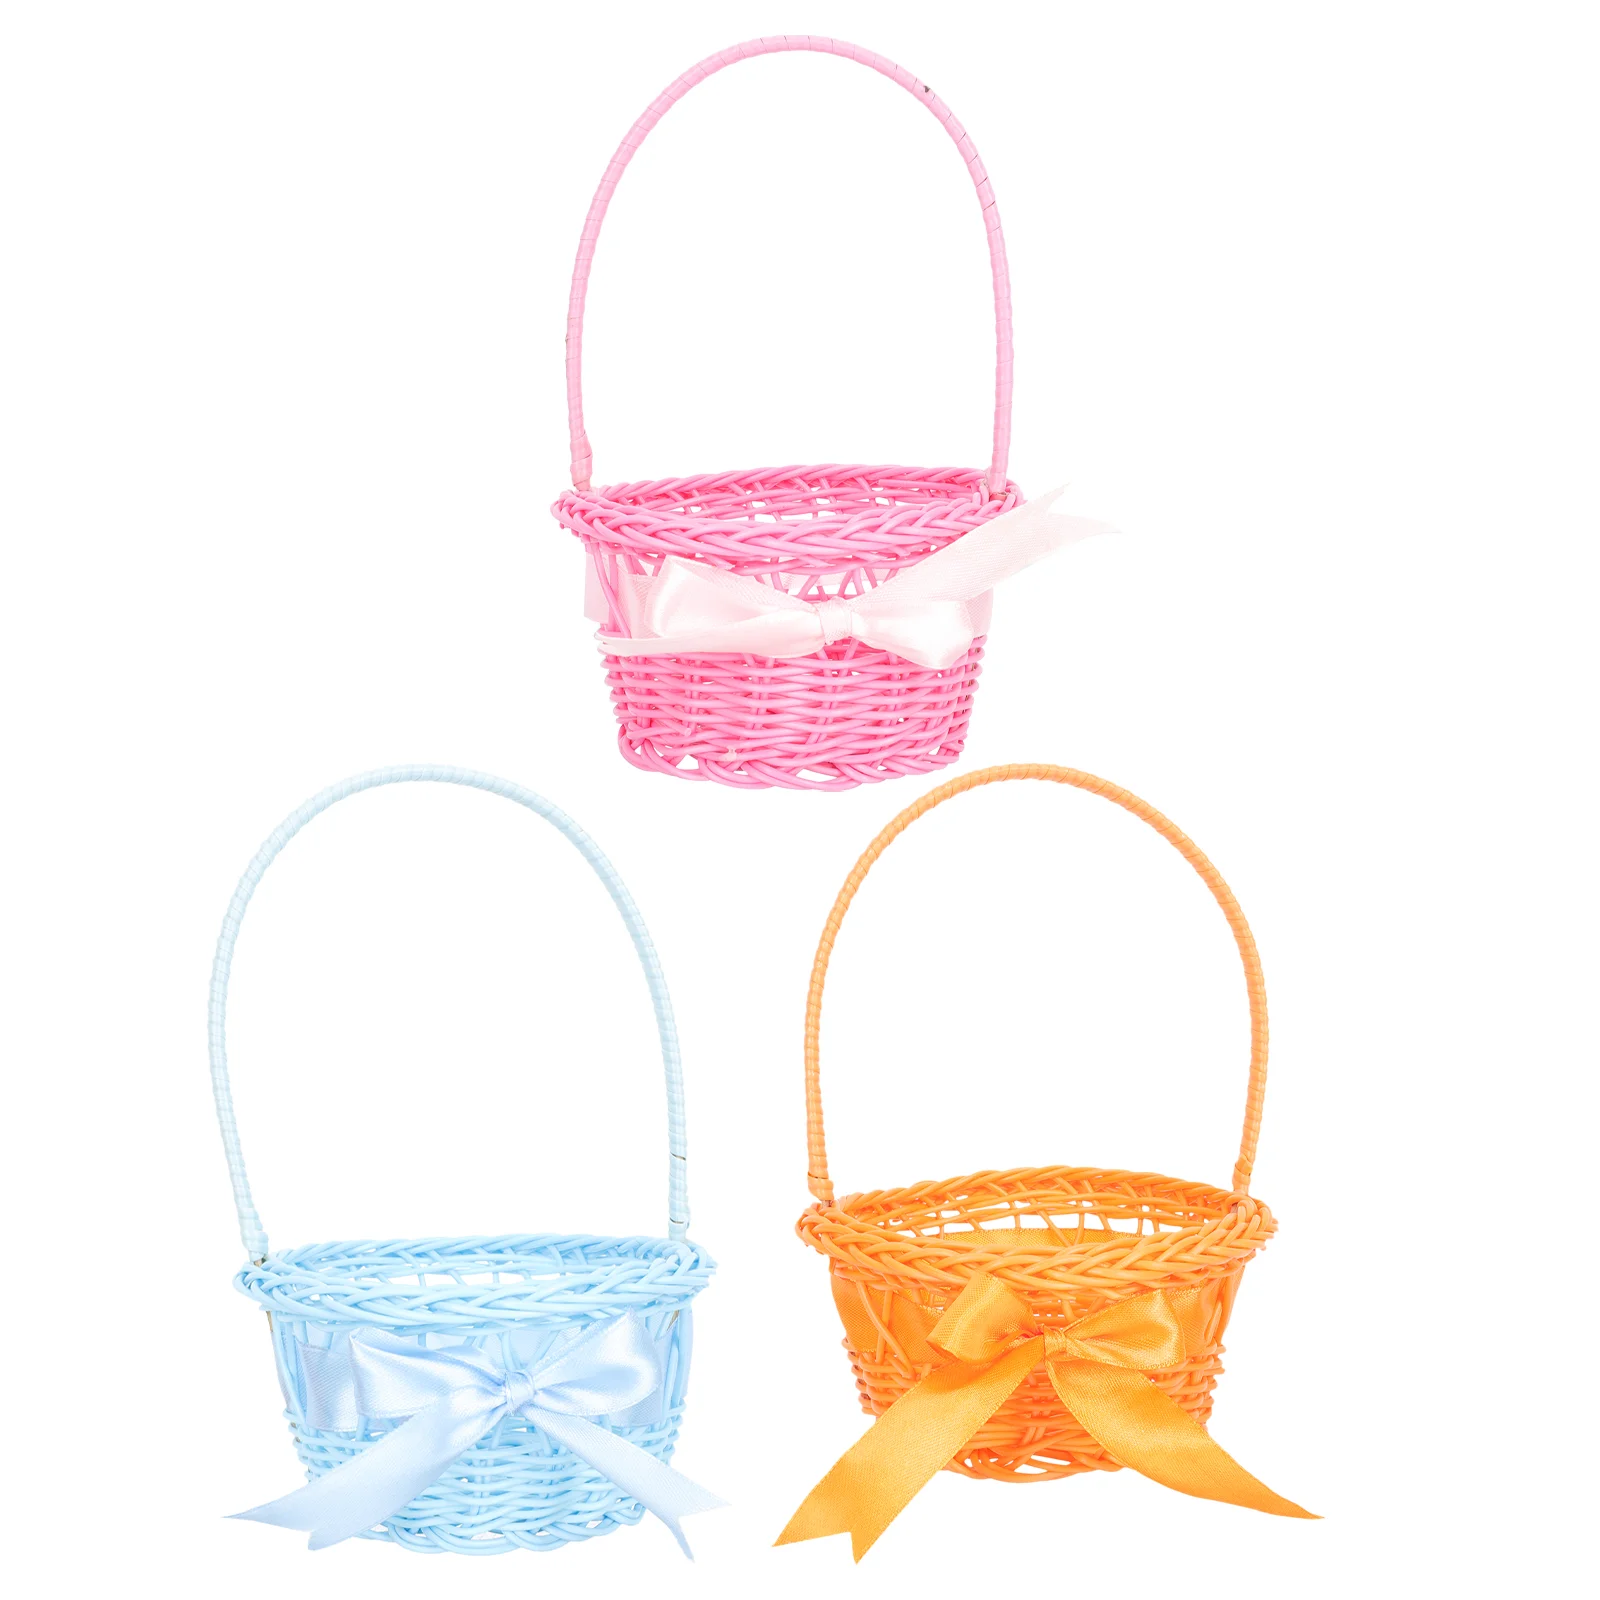 

Easter Basket Bucket Bunny Egg Goodies Candy Container Stuffers Fillers Favors Gift Party Garden Theme Tote Kids Eggs Woven